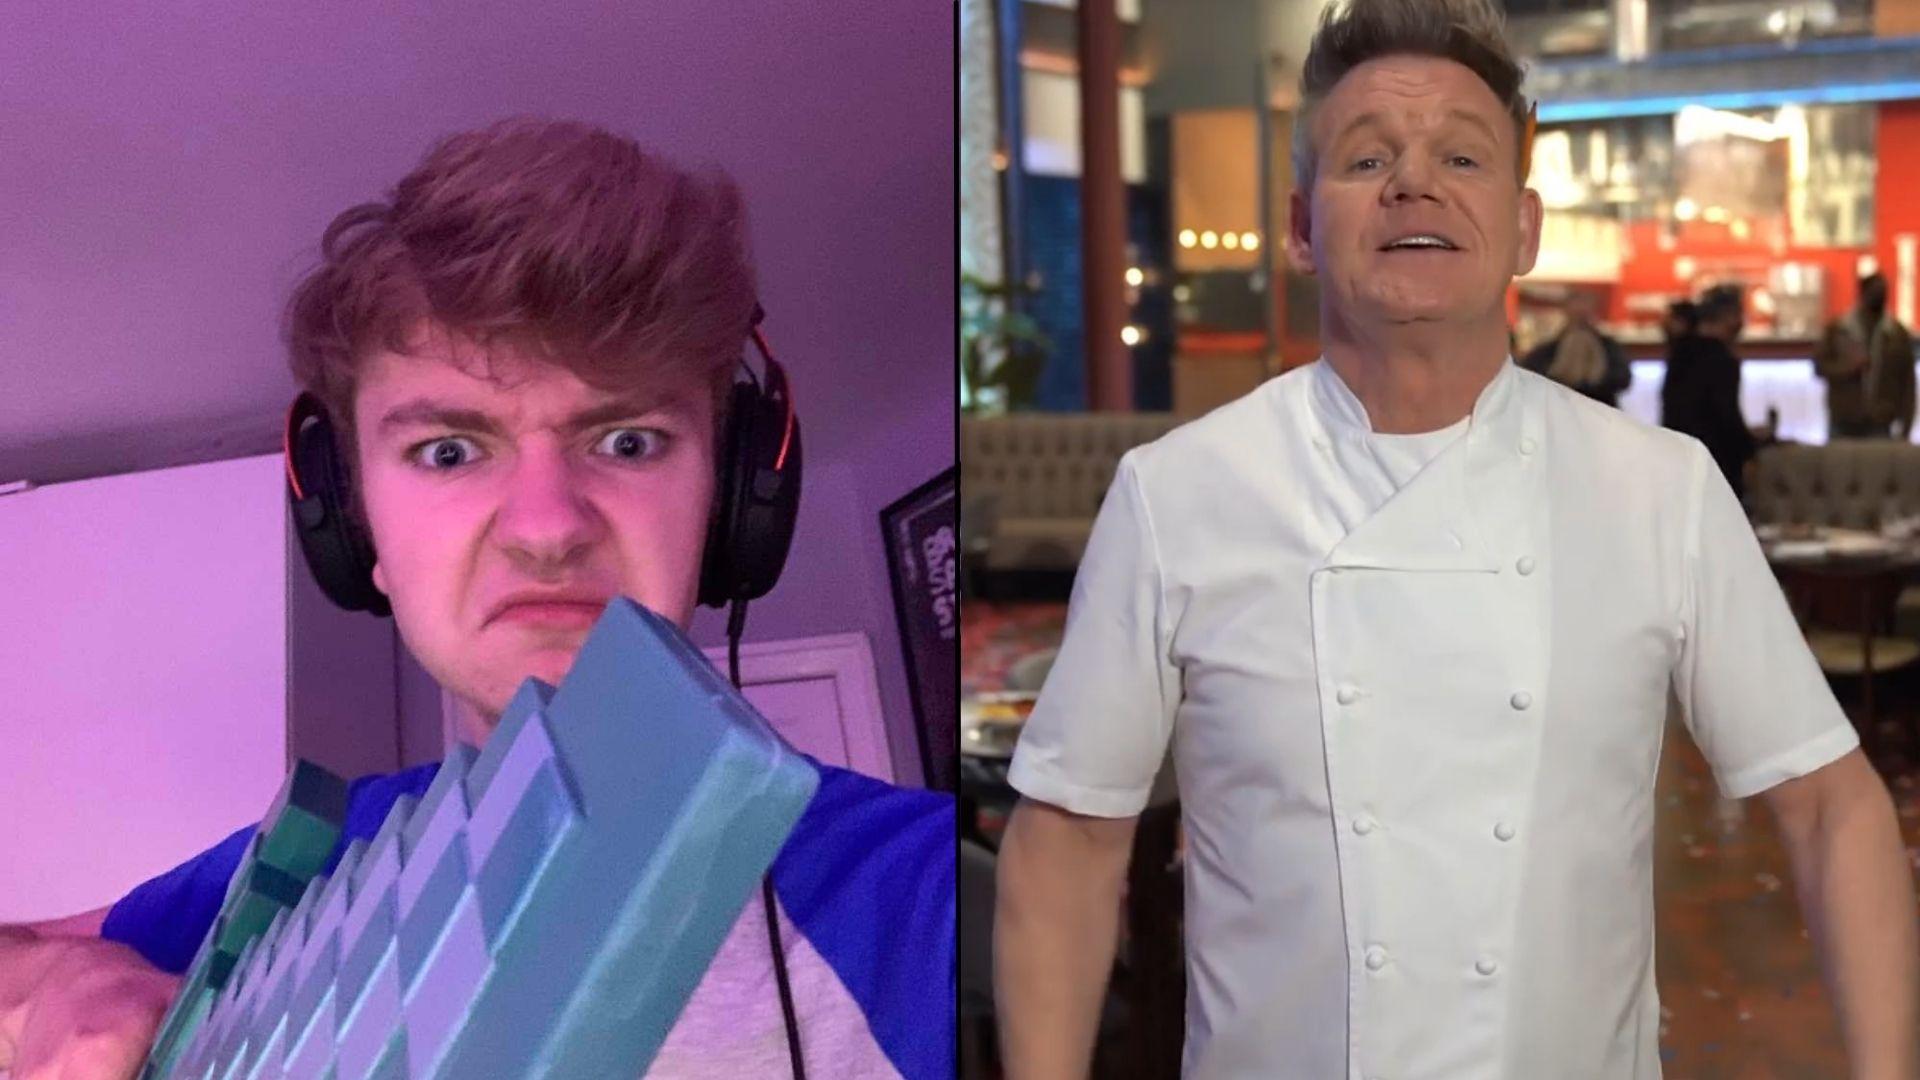 TommyInnit holding Minecraft sword at camera alongside Gordon Ramsay in chef outfit